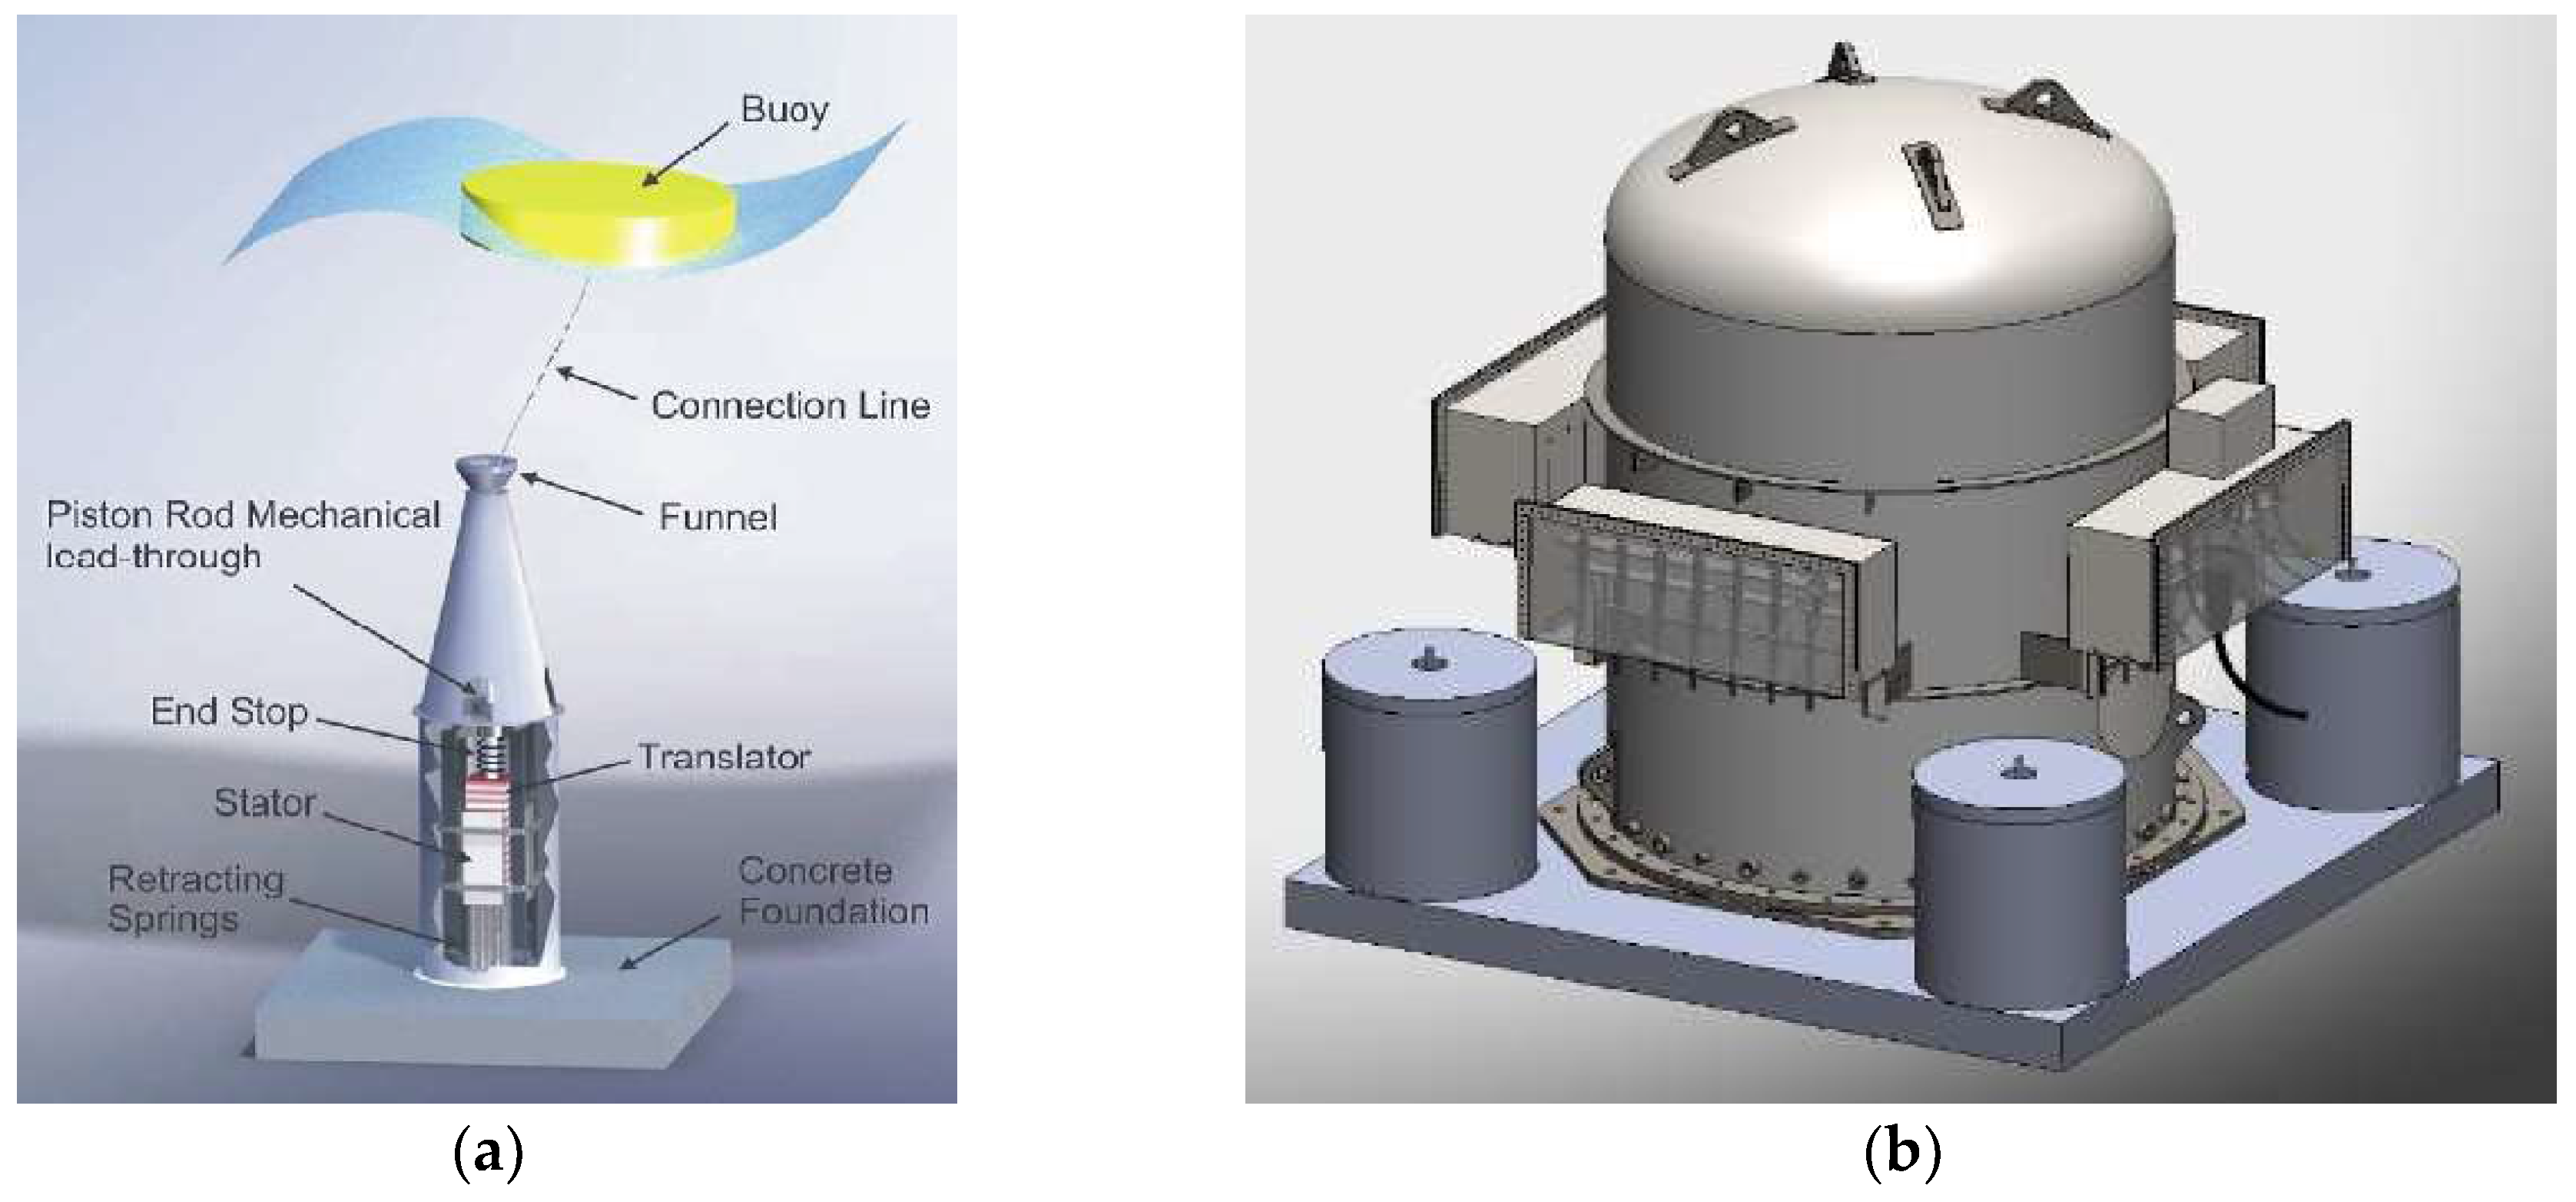 Jmse Free Full Text Deployment And Maintenance Of Wave Energy Converters At The Lysekil Research Site A Comparative Study On The Use Of Divers And Remotely Operated Vehicles Html